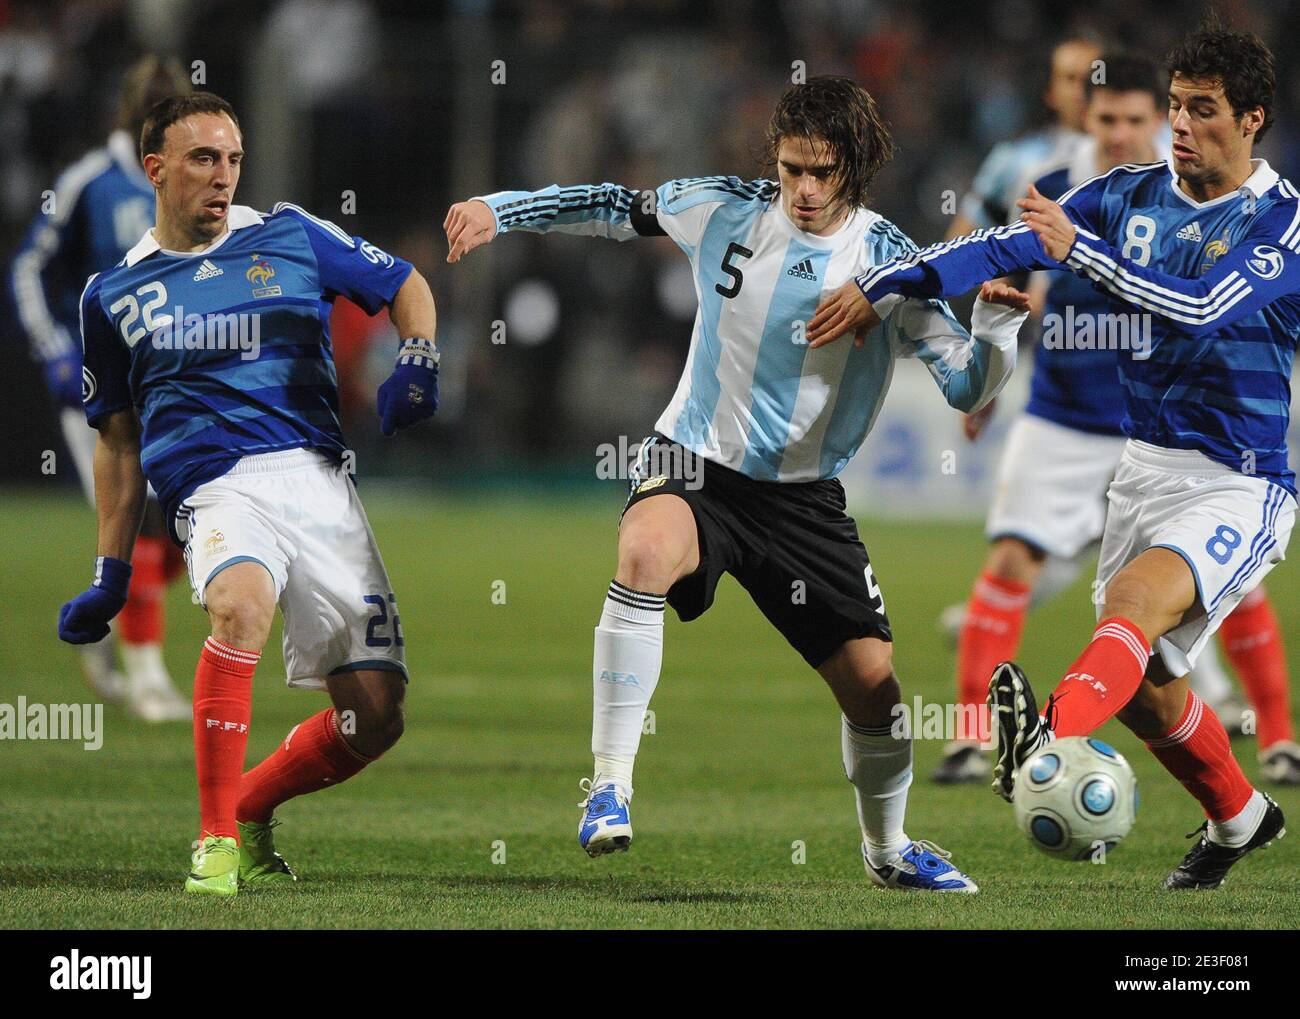 France's Franck Ribery, Argentina's Fernando Gago and France's Yoann Gourcuff during the International Friendly Soccer match, France vs Argentina at the velodrome Stadium in Marseille, France on February 11, 2009. Argentina won 2-0. Photo by Steeve McMay/ABACAPRESS.COM Stock Photo